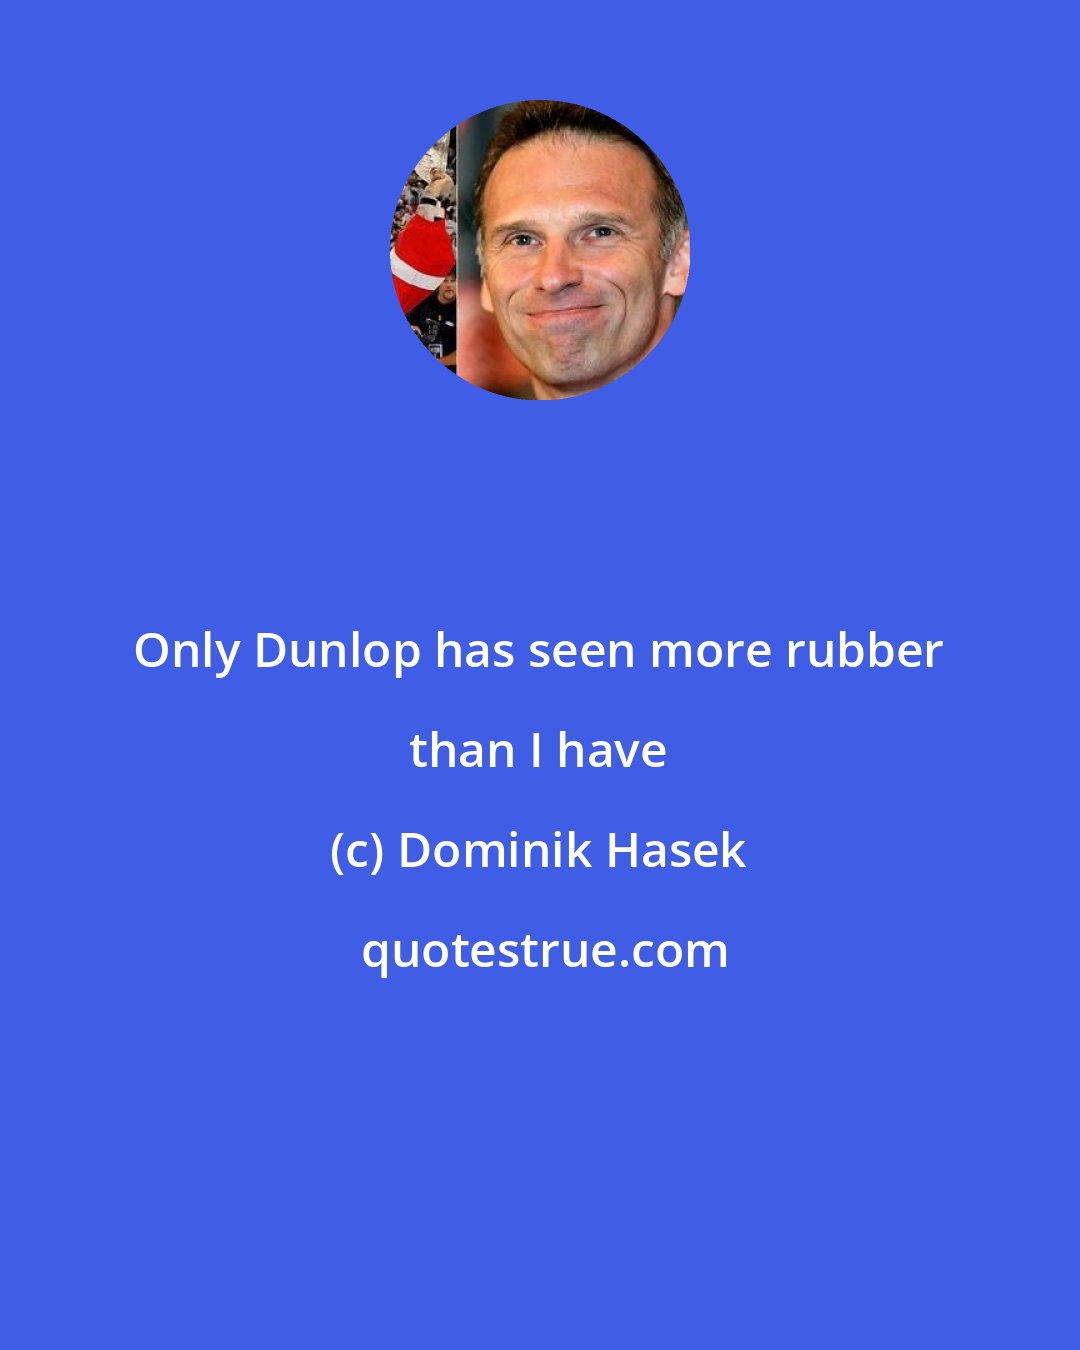 Dominik Hasek: Only Dunlop has seen more rubber than I have